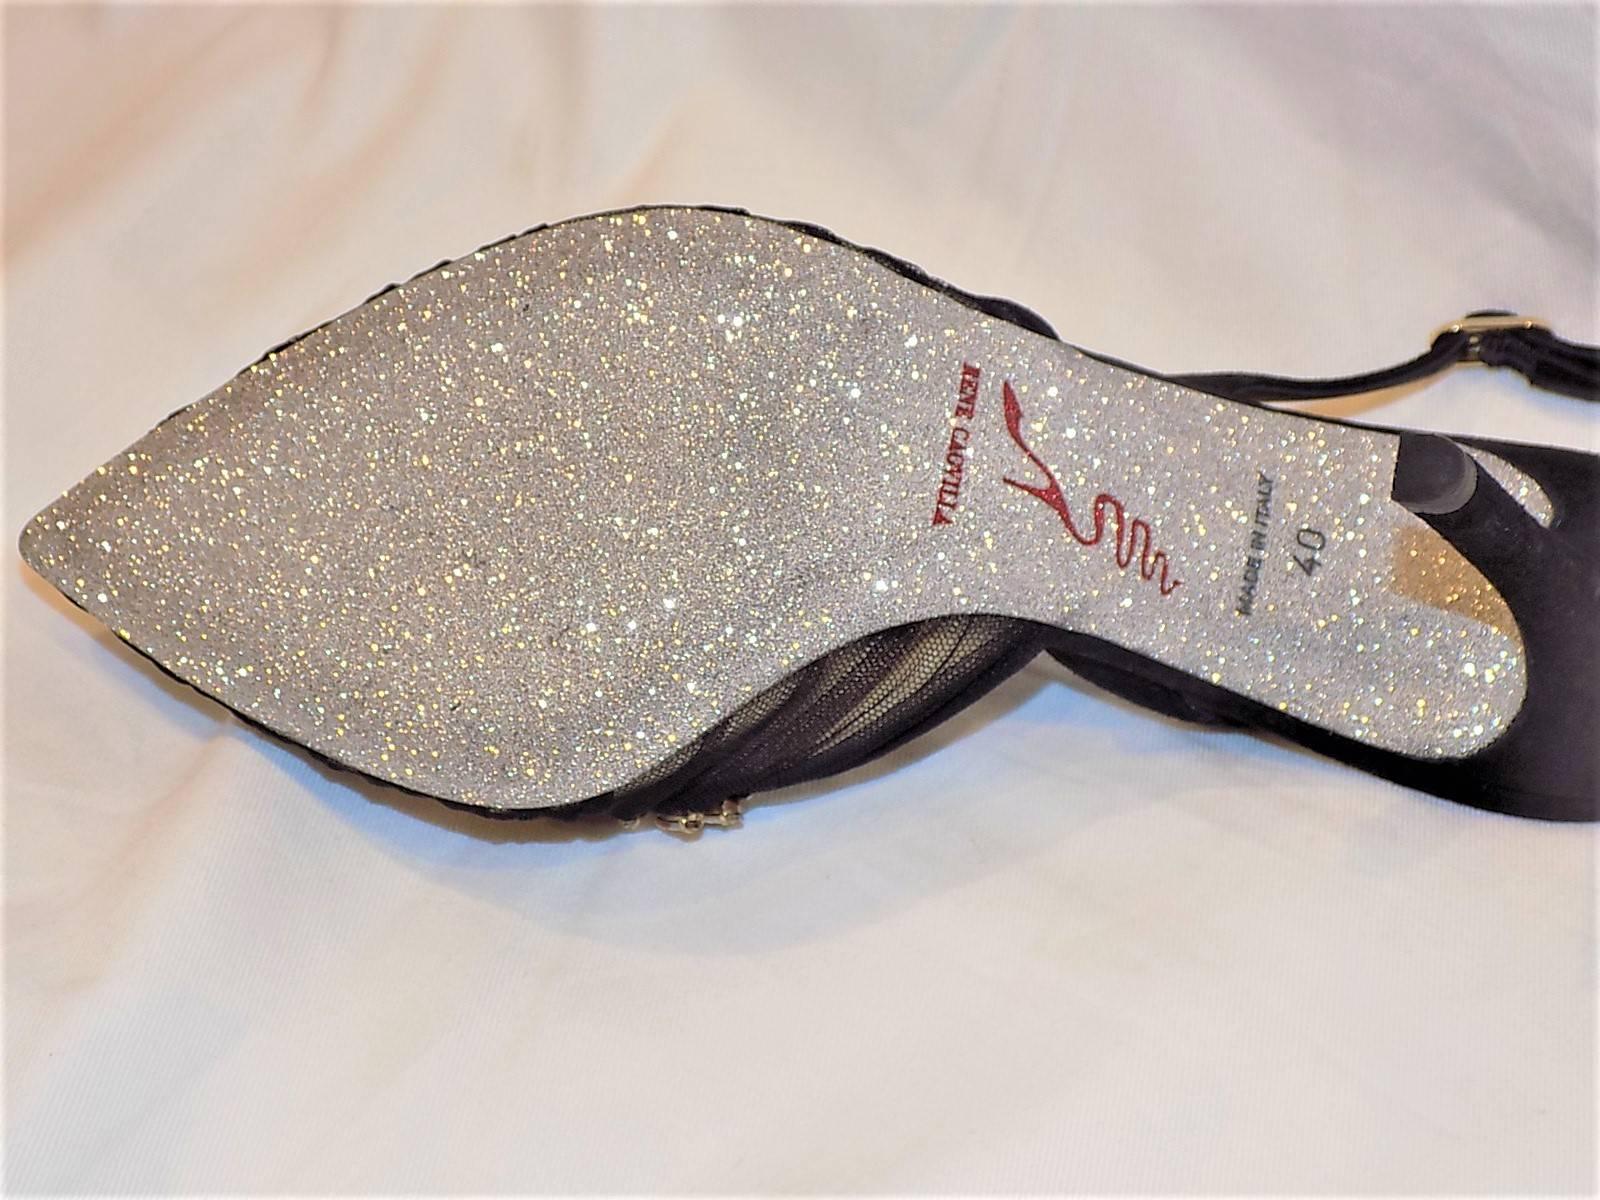 Women's  NEW and sold out  Rene Caovilla embelished glitter sole evening shoe sz 40 For Sale